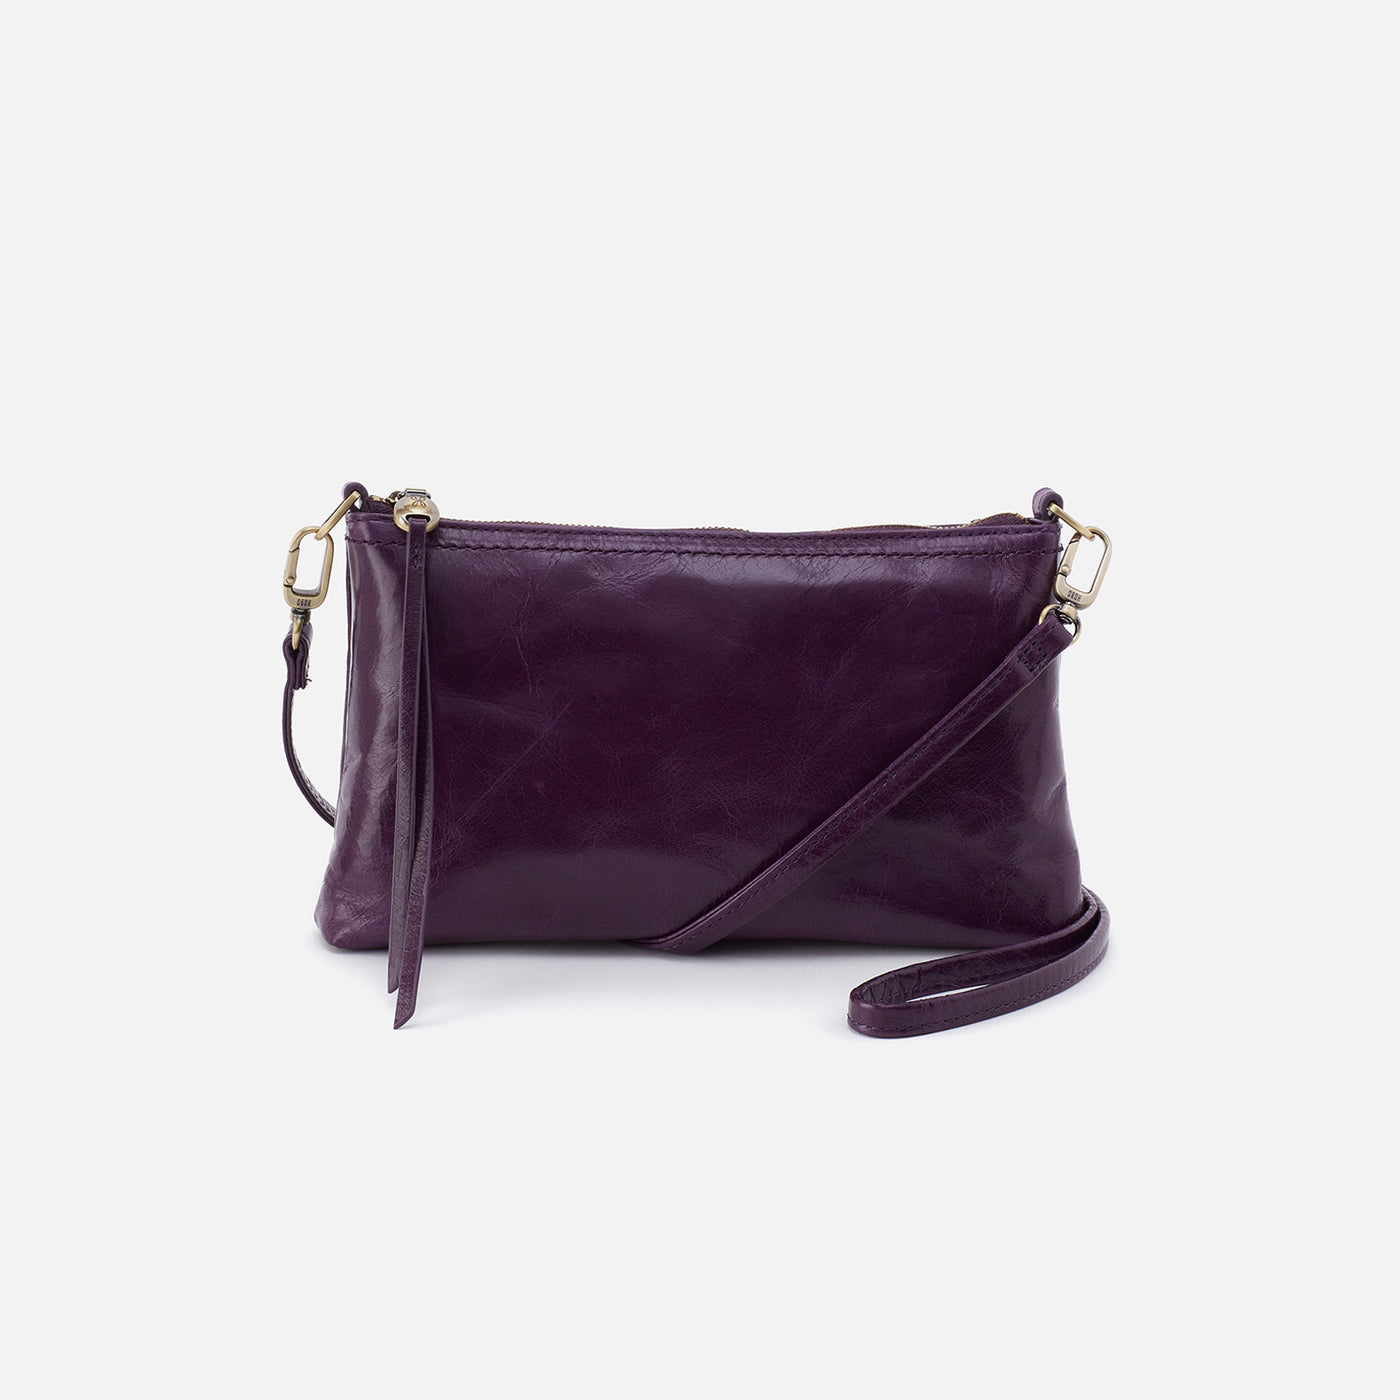 Darcy Crossbody in Polished Leather - Deep Purple